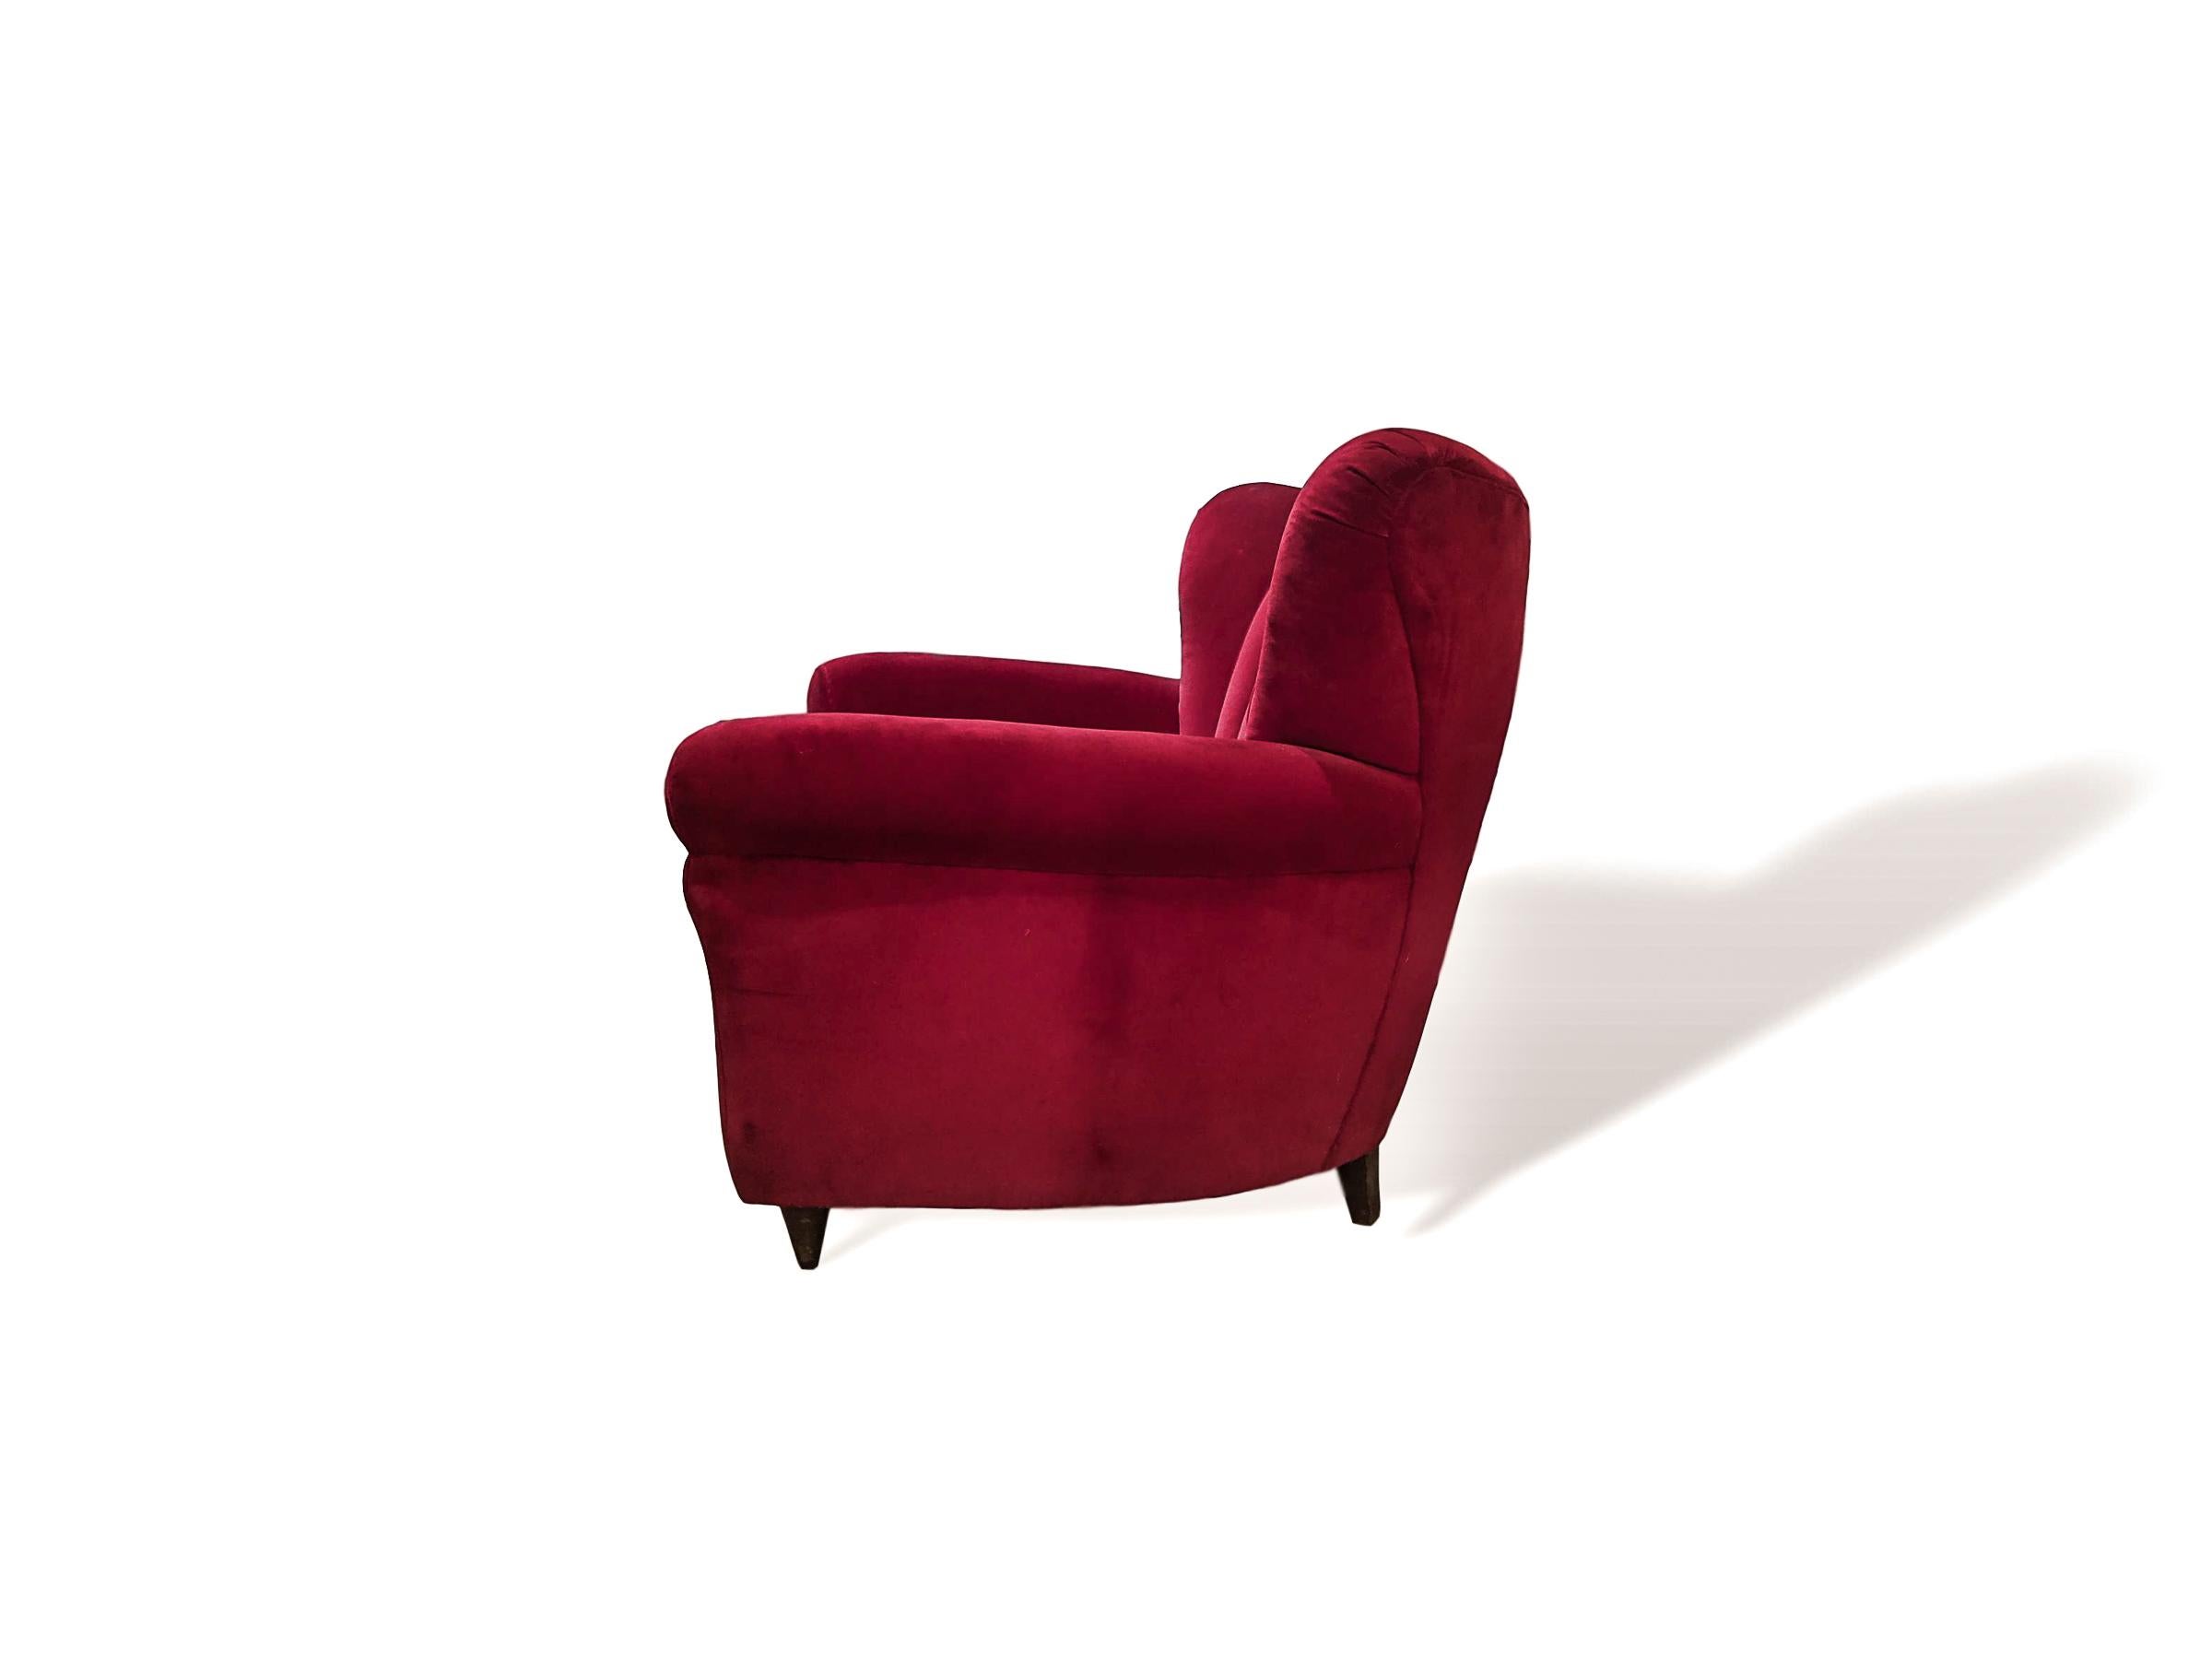 Mid-20th Century Pair of Modern Lounge Chairs attributed to Guglielmo Ulrich, Italian, circa 1940